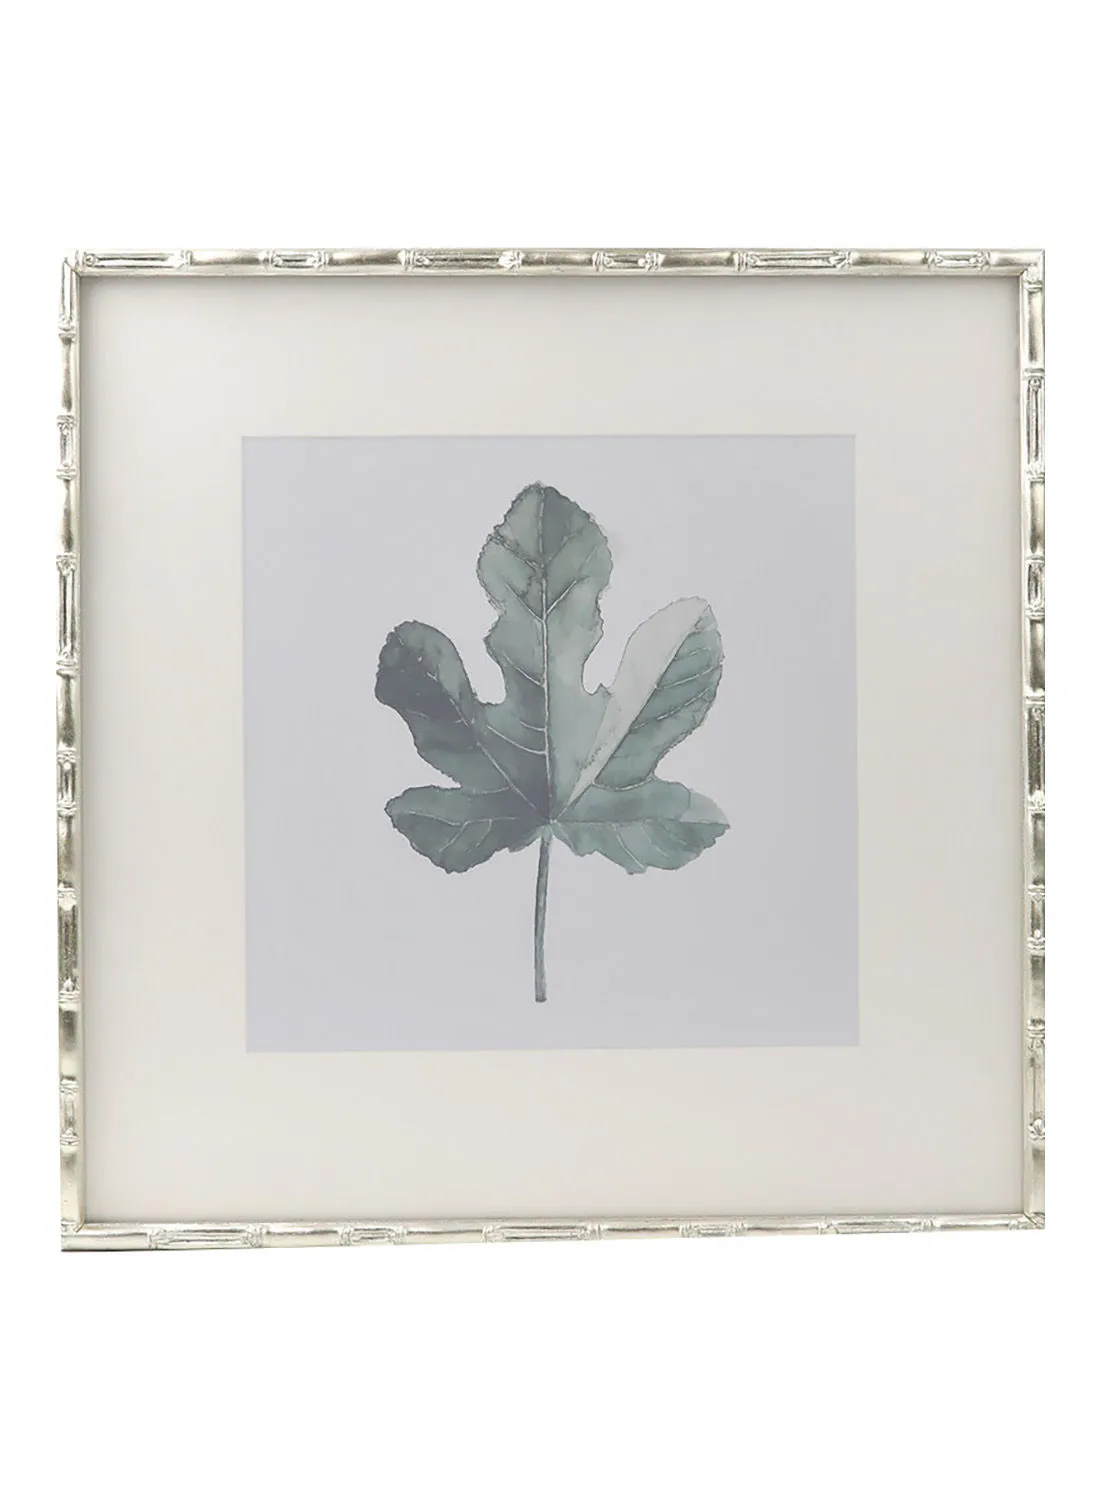 Switch Perfect Design Wall Frames Silver/White outer frame size: L37xH43xT3.4cm for photo size: 8x10inch